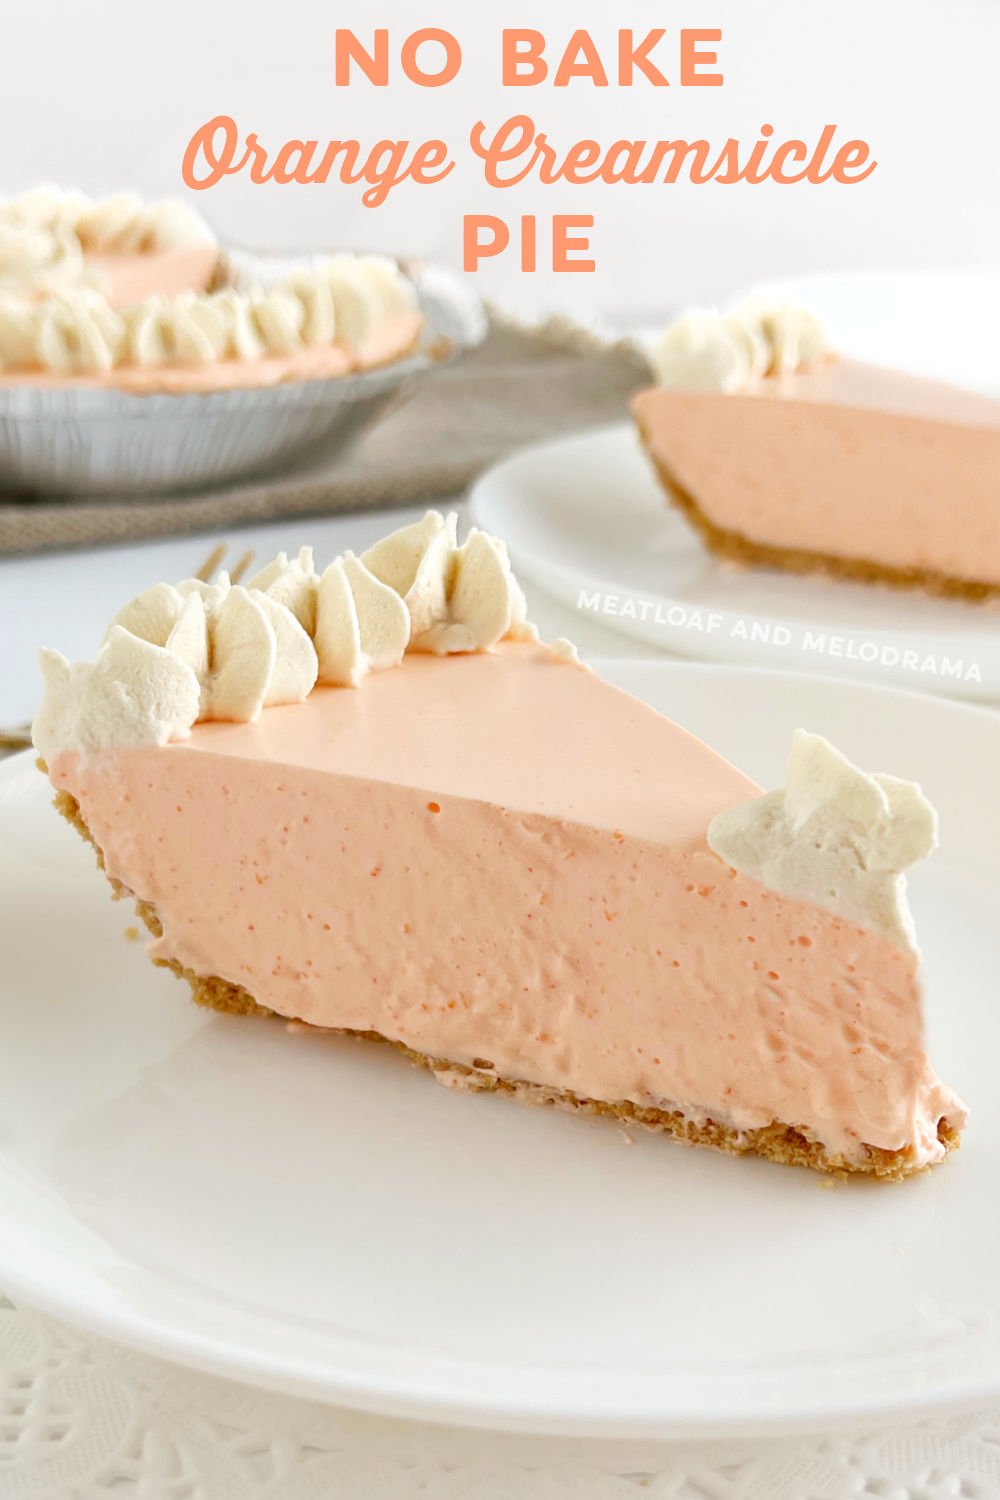 This easy Orange Creamsicle Pie recipe with Jello and Cool Whip in a graham cracker crust is an easy no bake dessert perfect for spring or a hot summer day. Only 4 ingredients for this delicious pie!  via @meamel